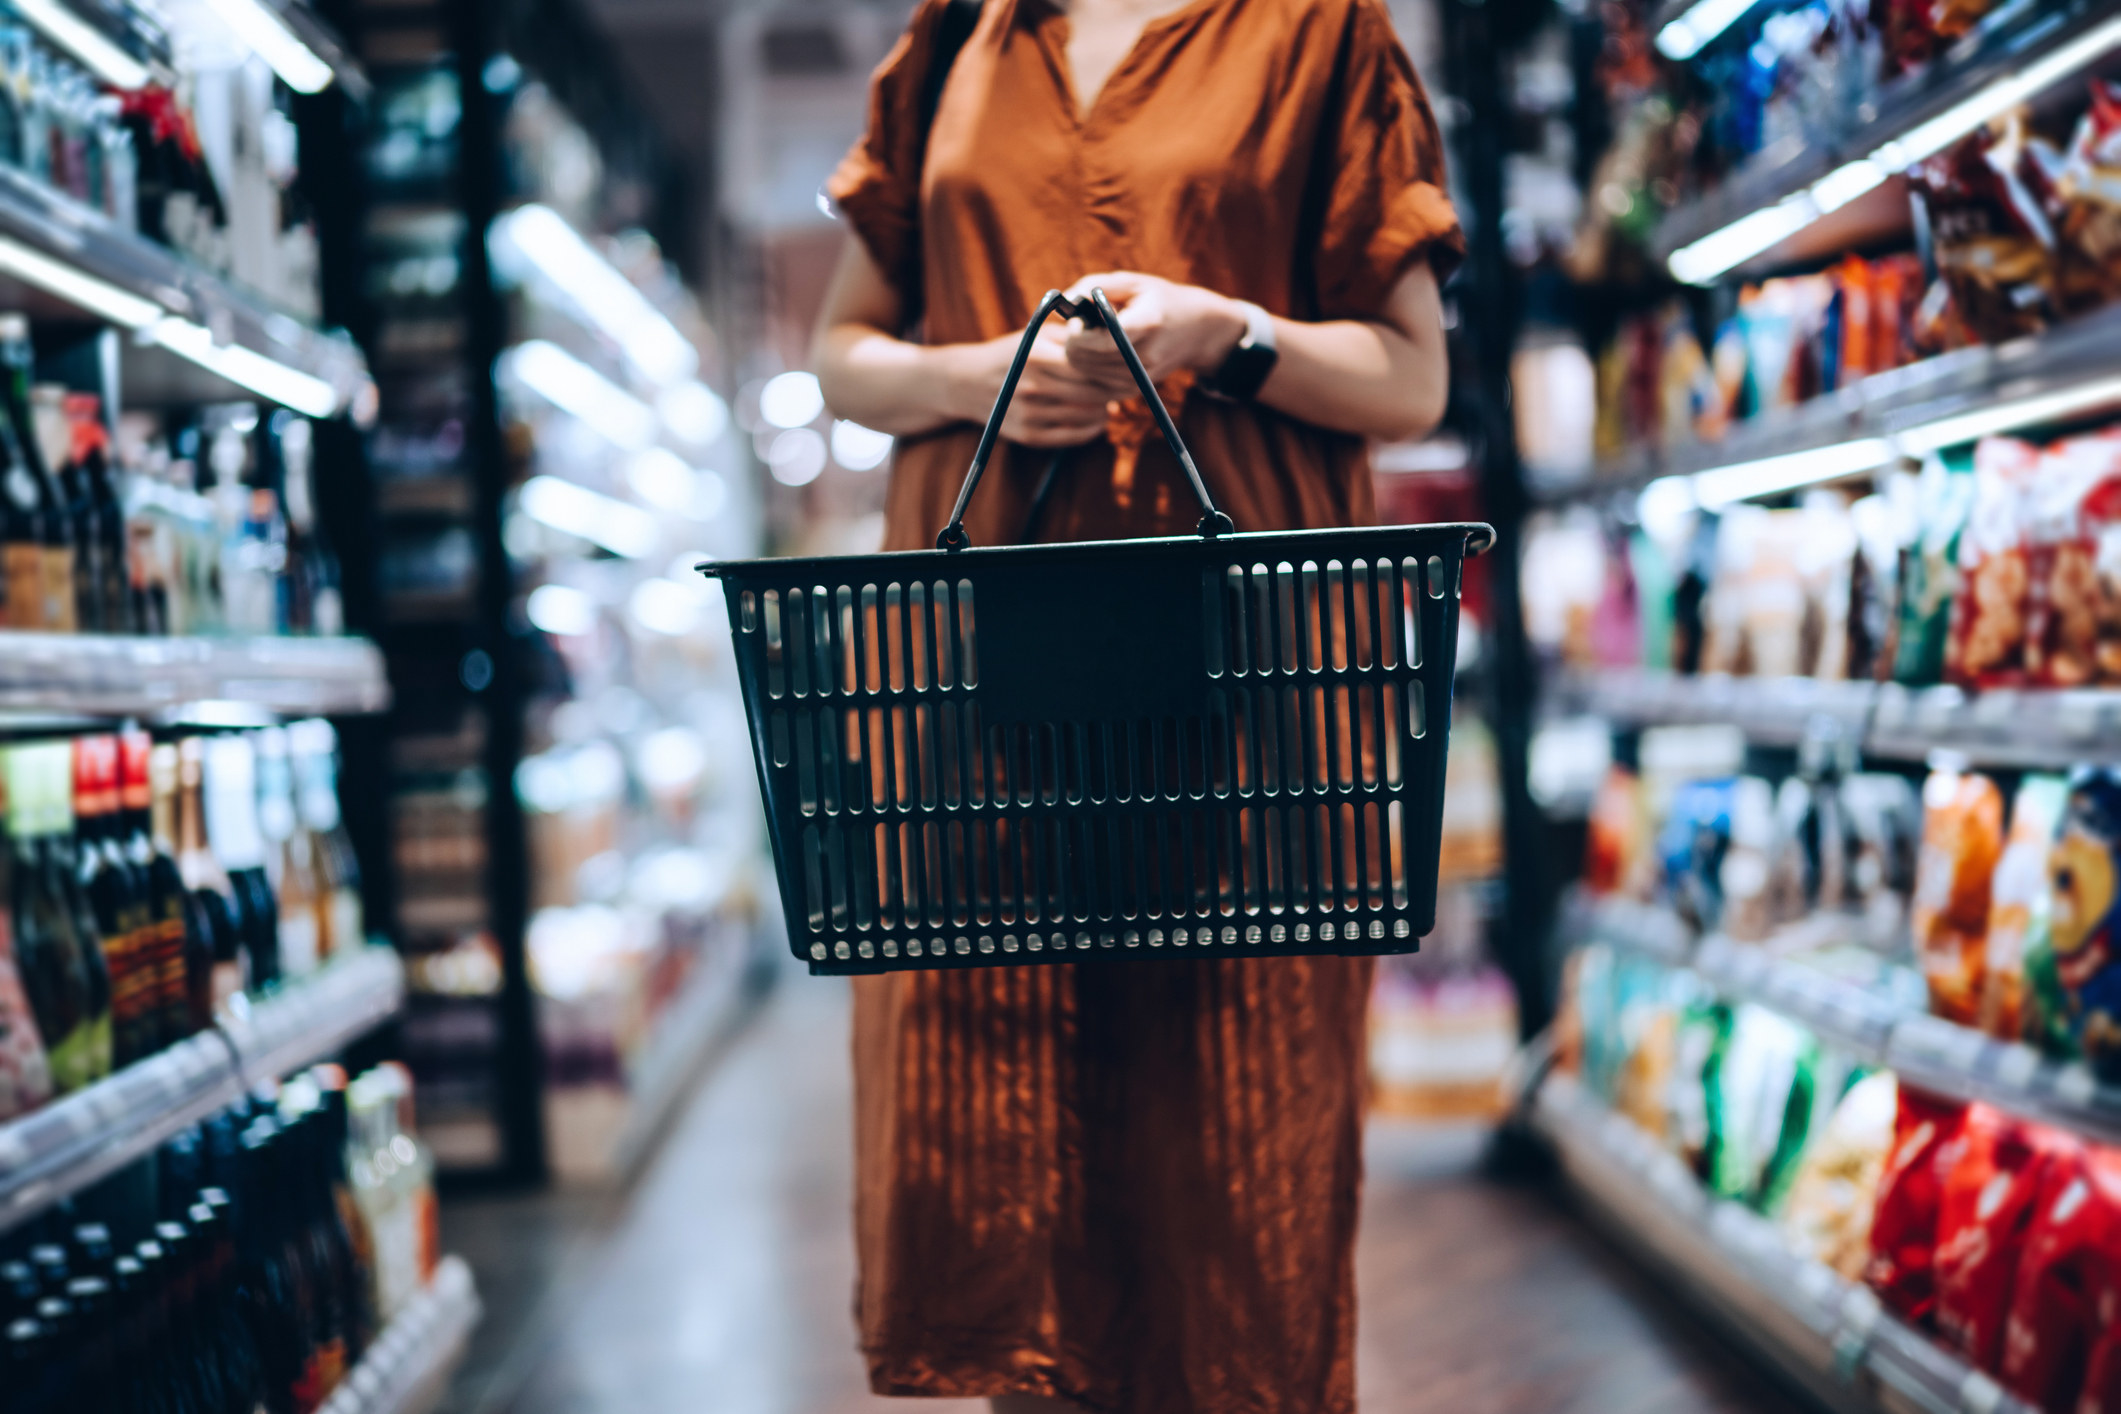 A young woman carrying a shopping basket in a grocery store.